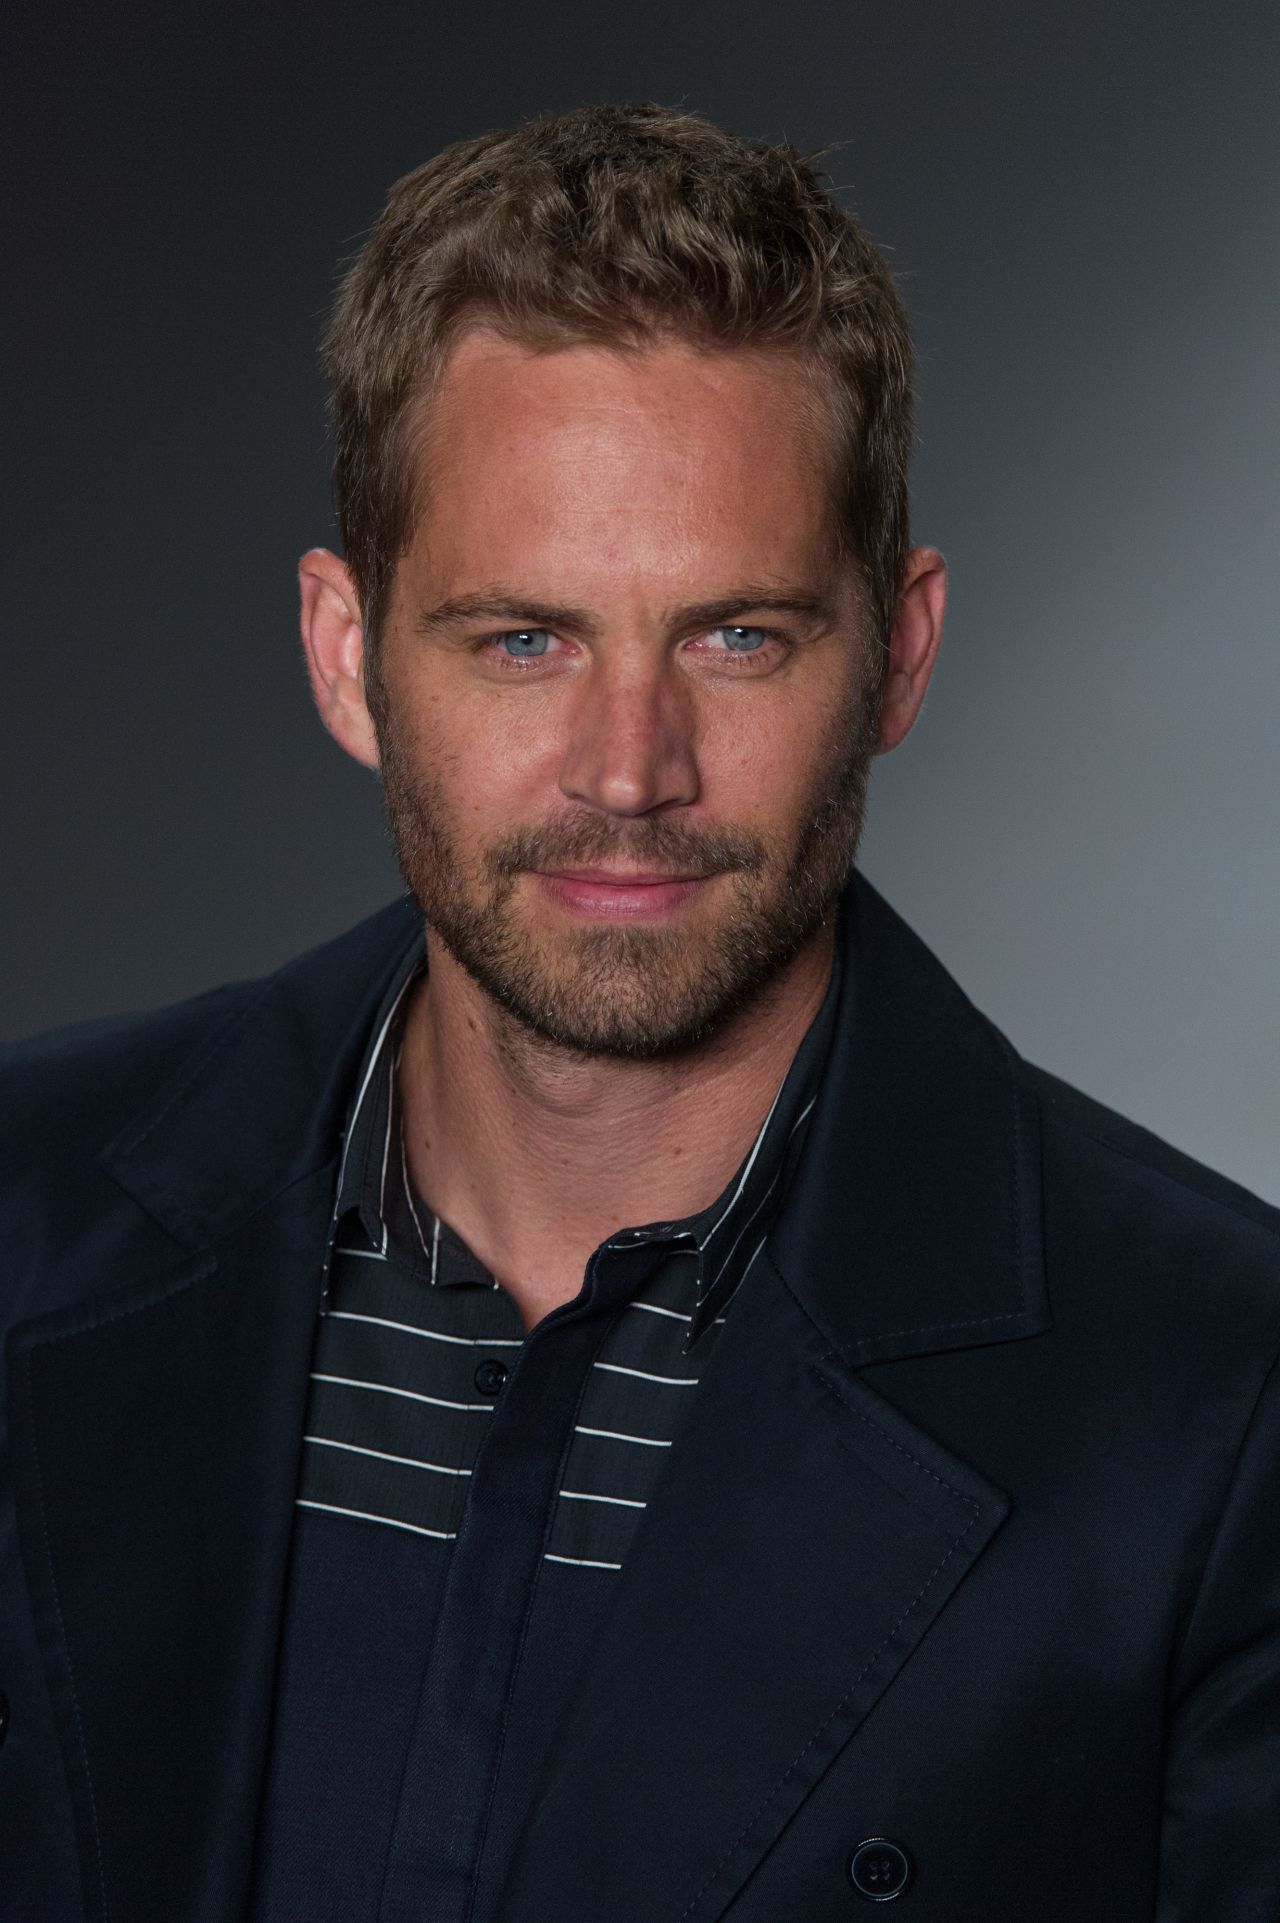 After Paul Walker's death in a car crash in November 2013, producers decided to retire his character, Brian O'Conner, in "Fast & Furious 7."